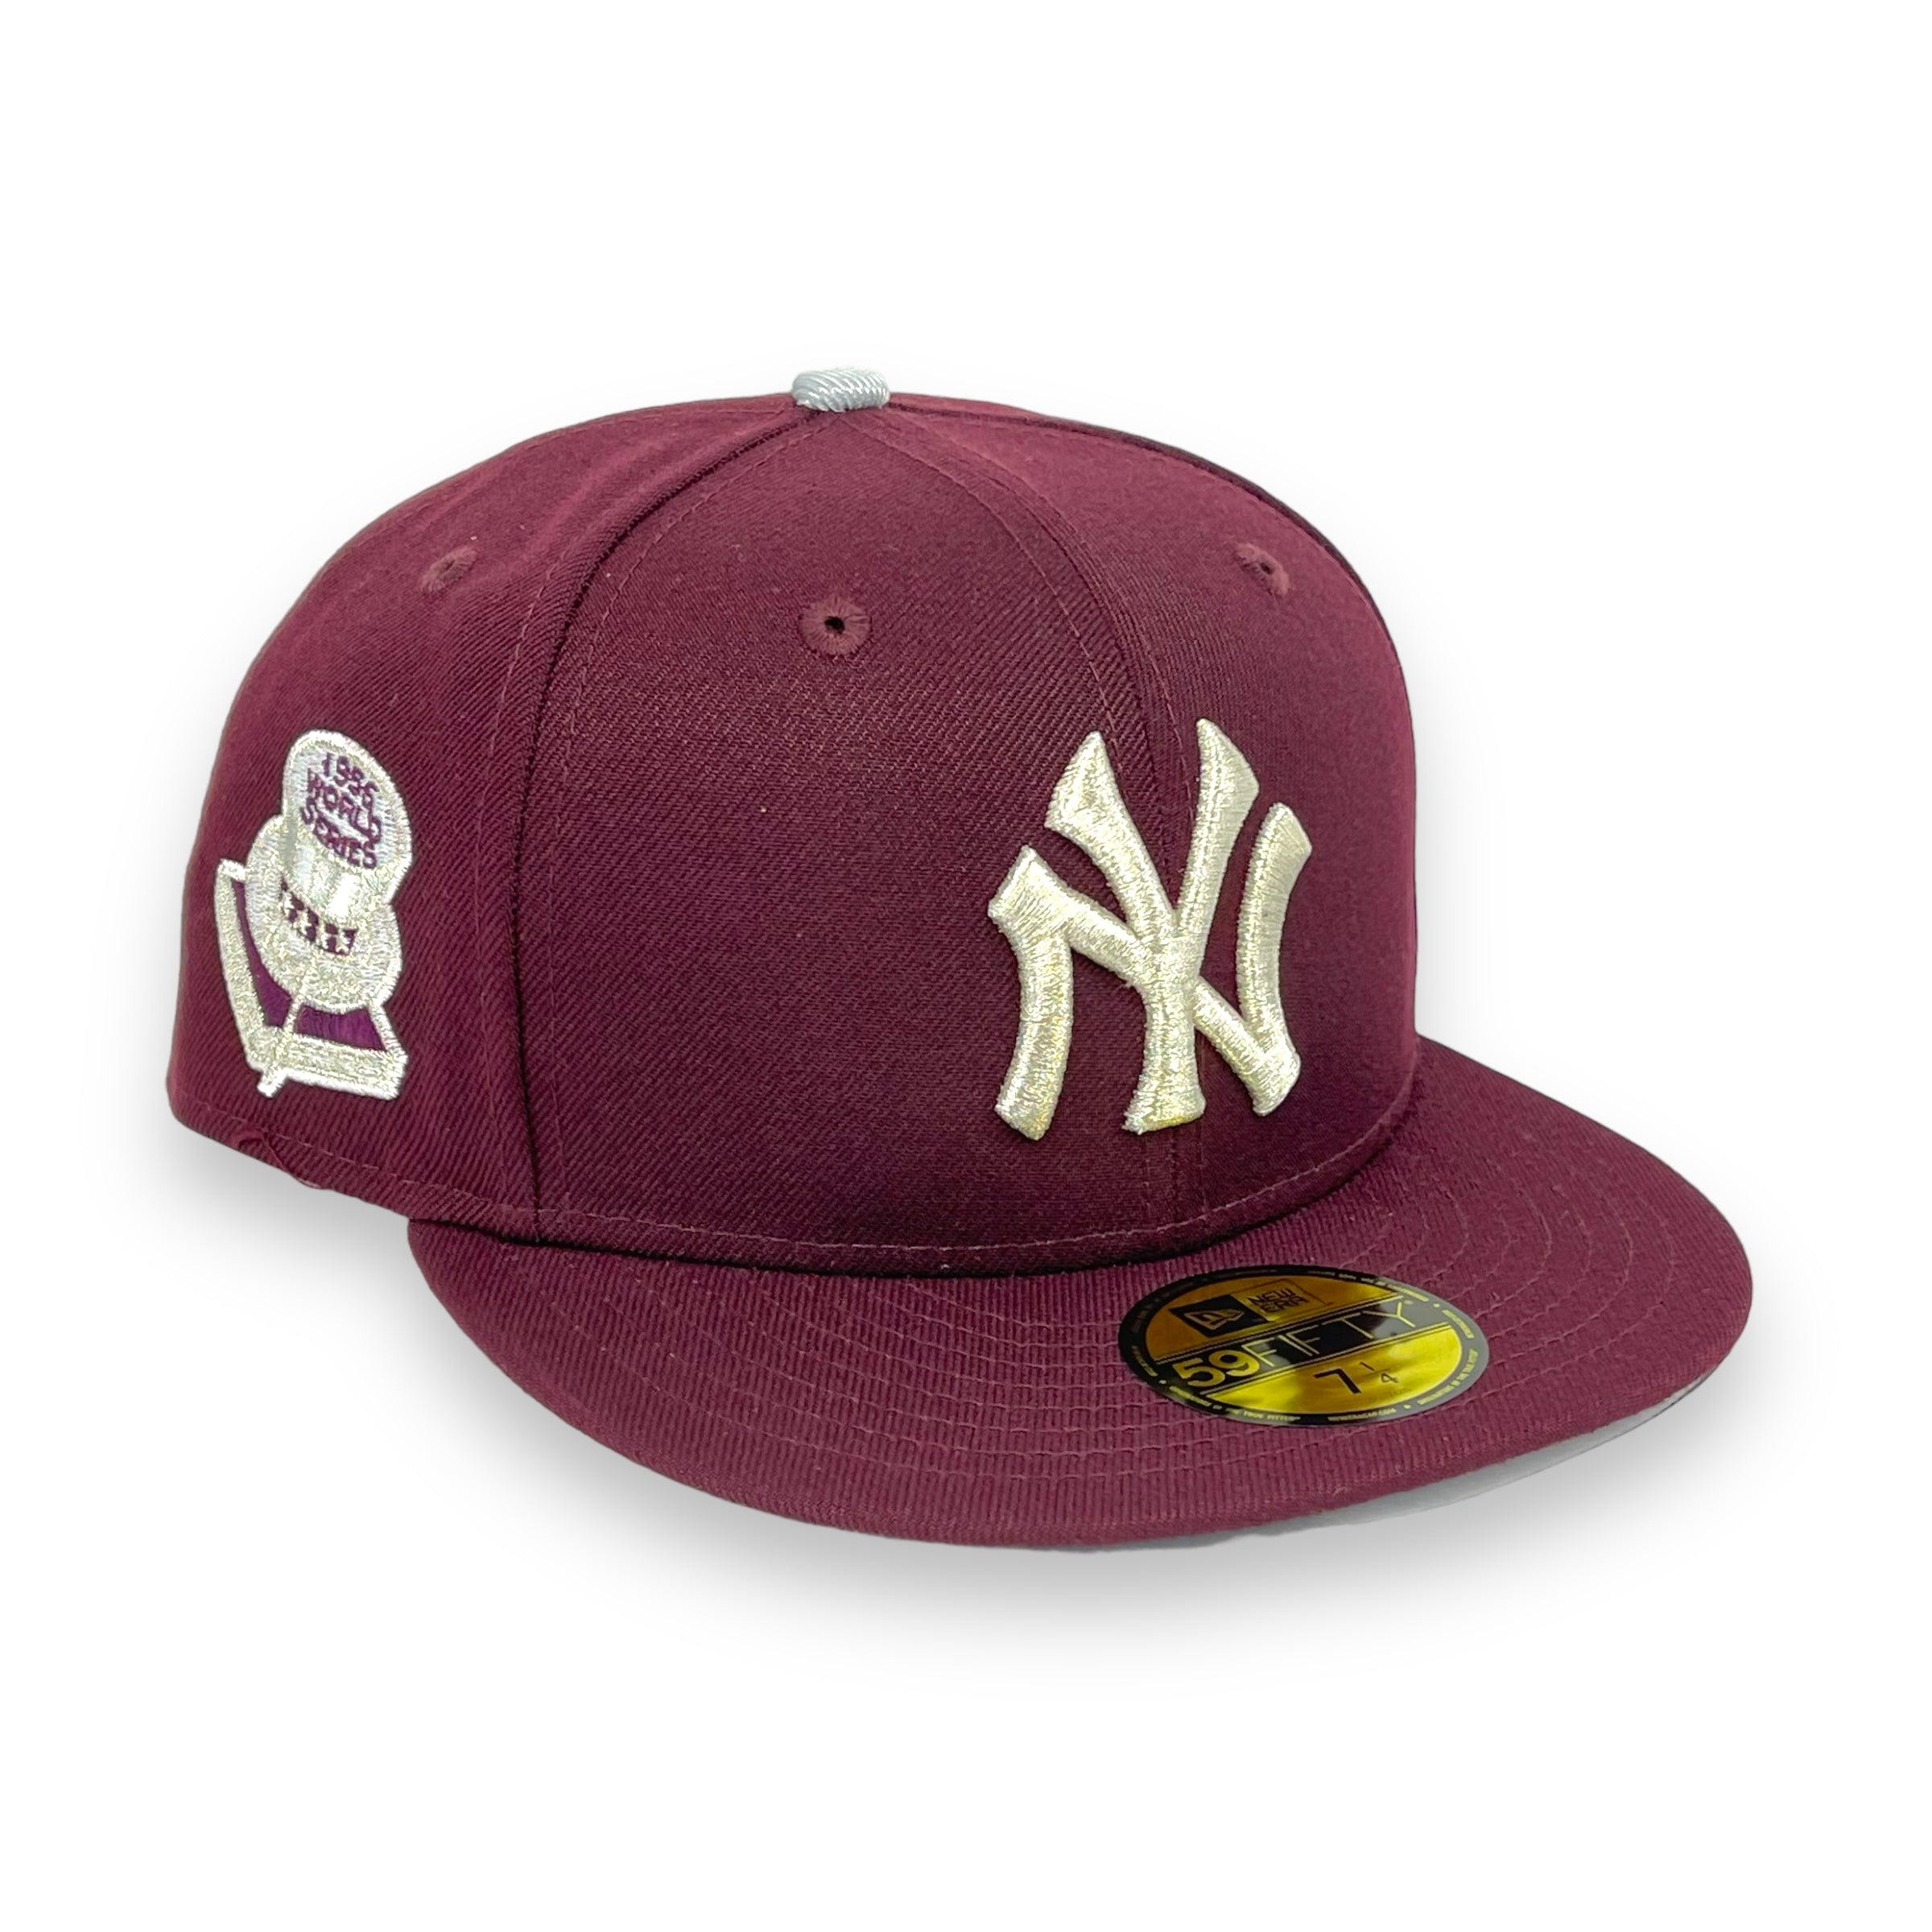 NEW YORK YANKEES (MAROON) (1956 WORLD SERIES) NEW ERA 59FIFTY FITTED (SILVER UNDER VISOR)